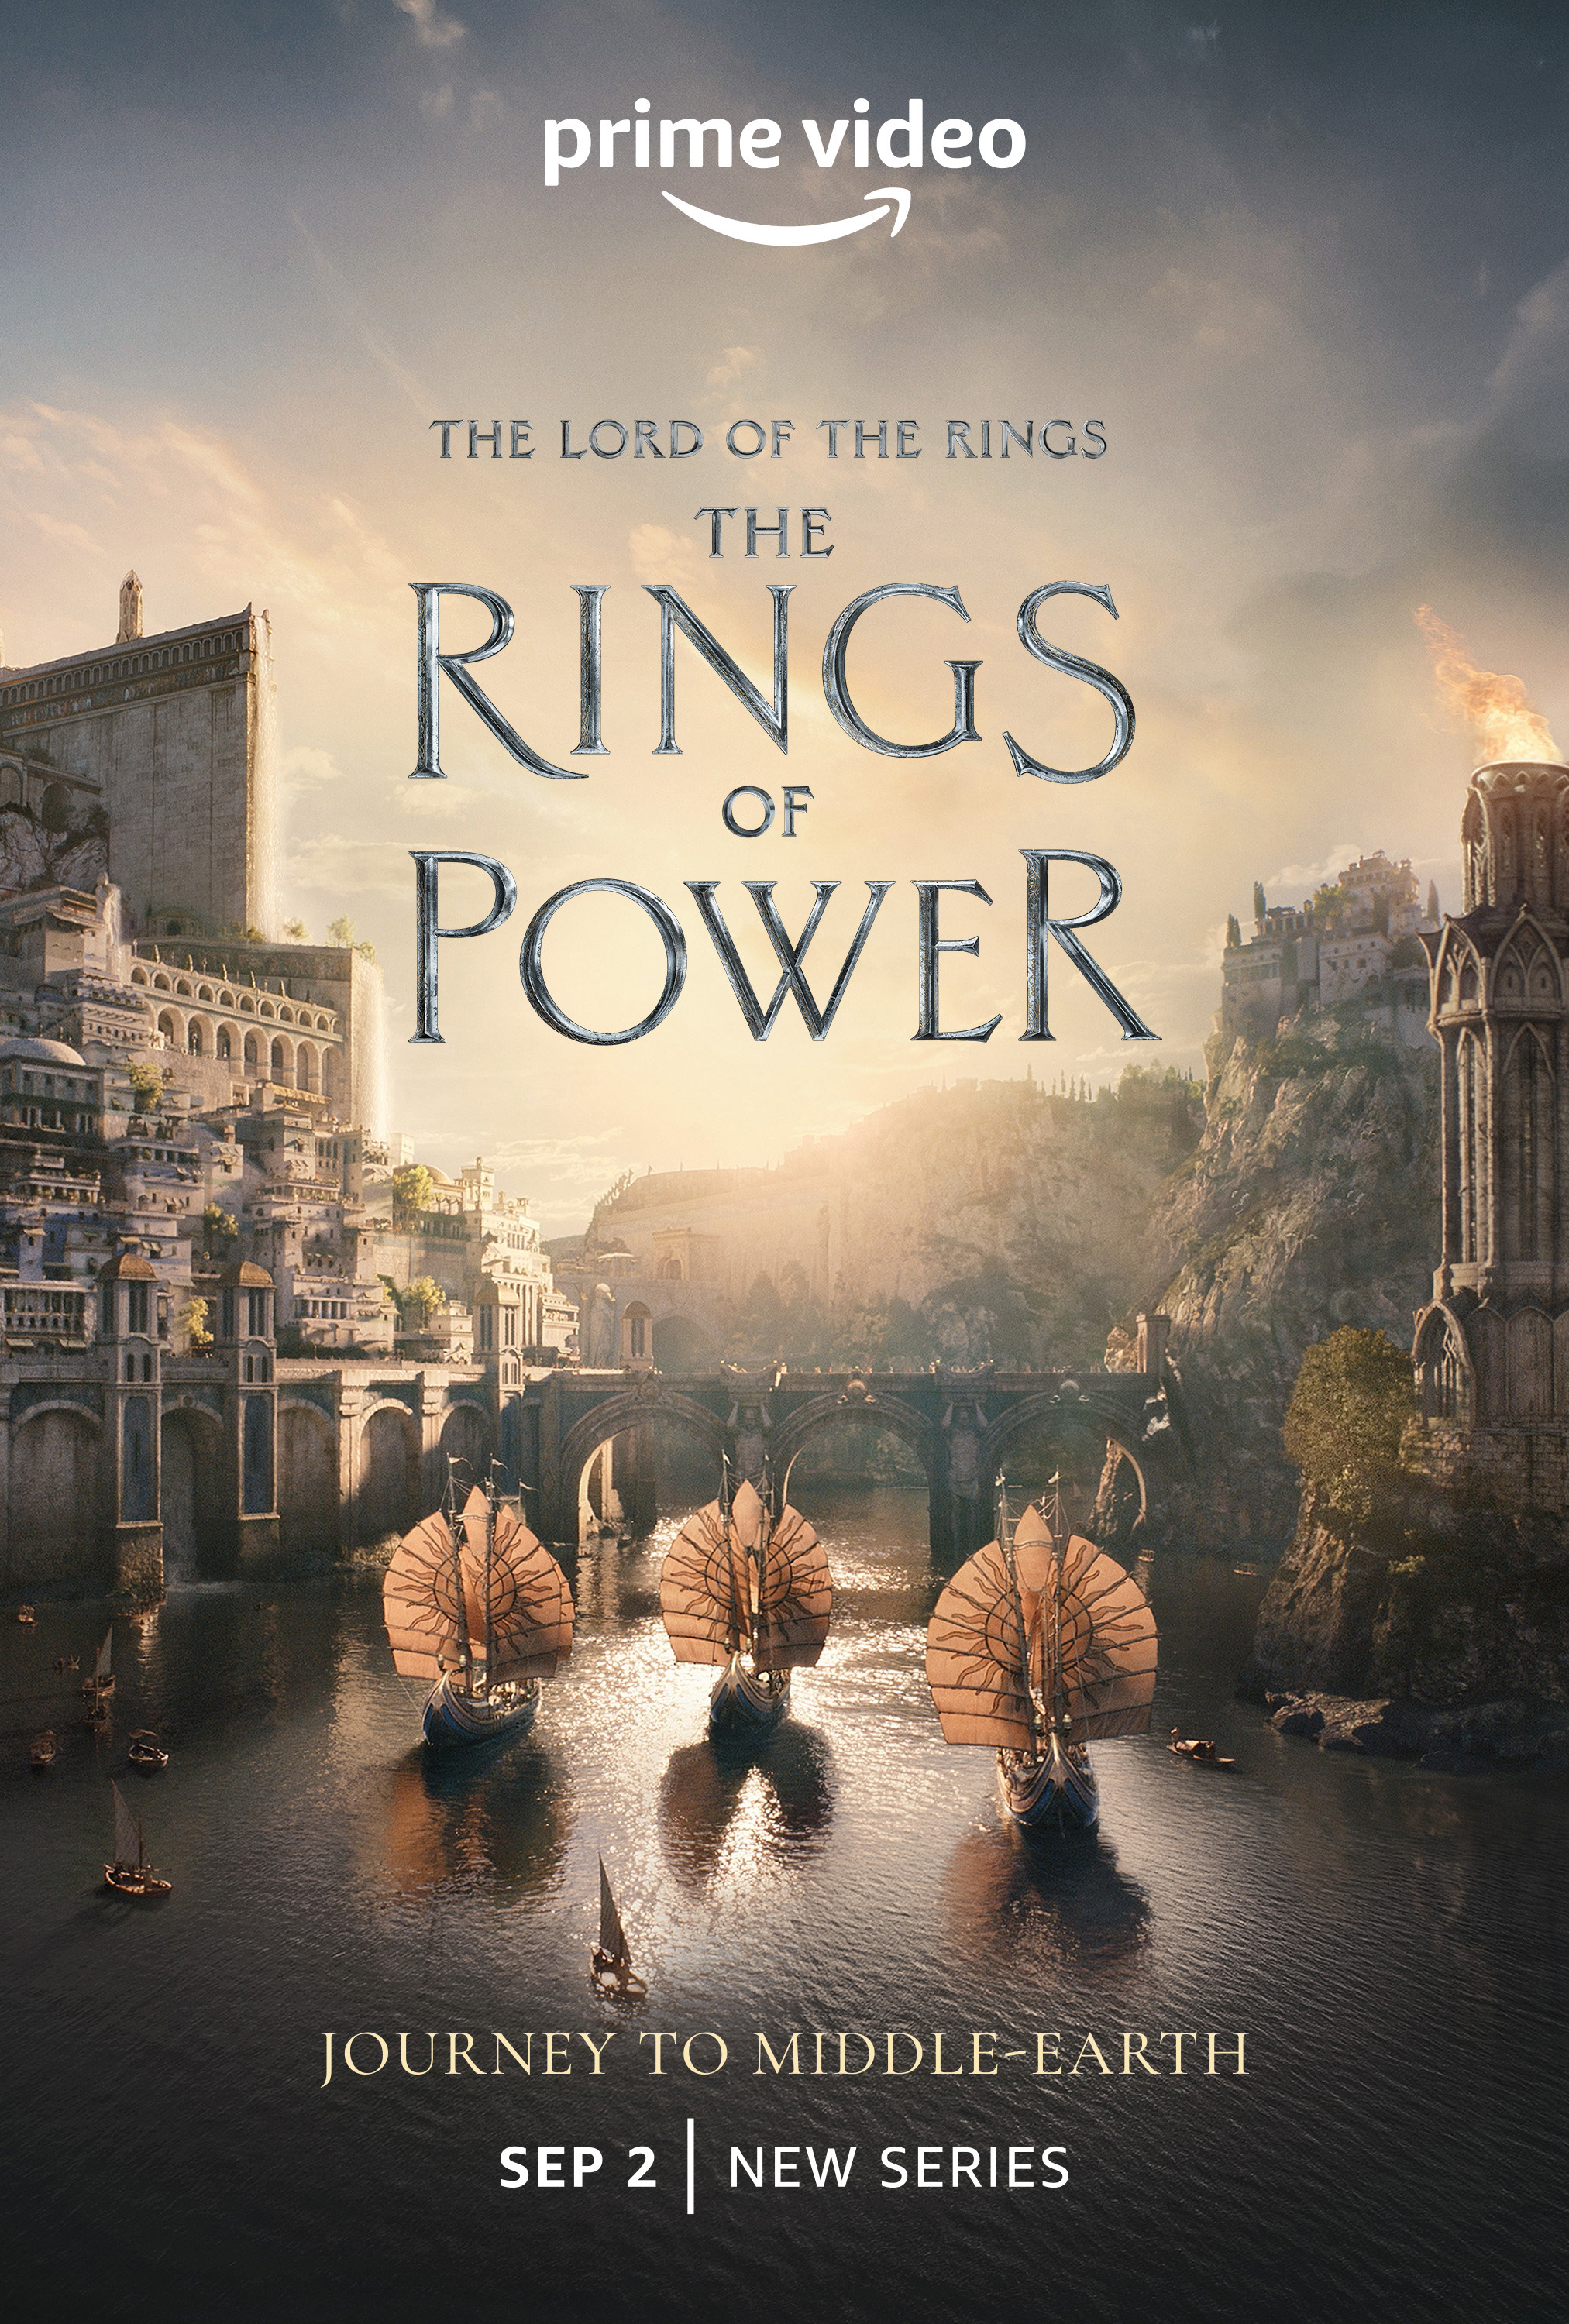 Mega Sized Movie Poster Image for The Lord of the Rings: The Rings of Power (#52 of 69)